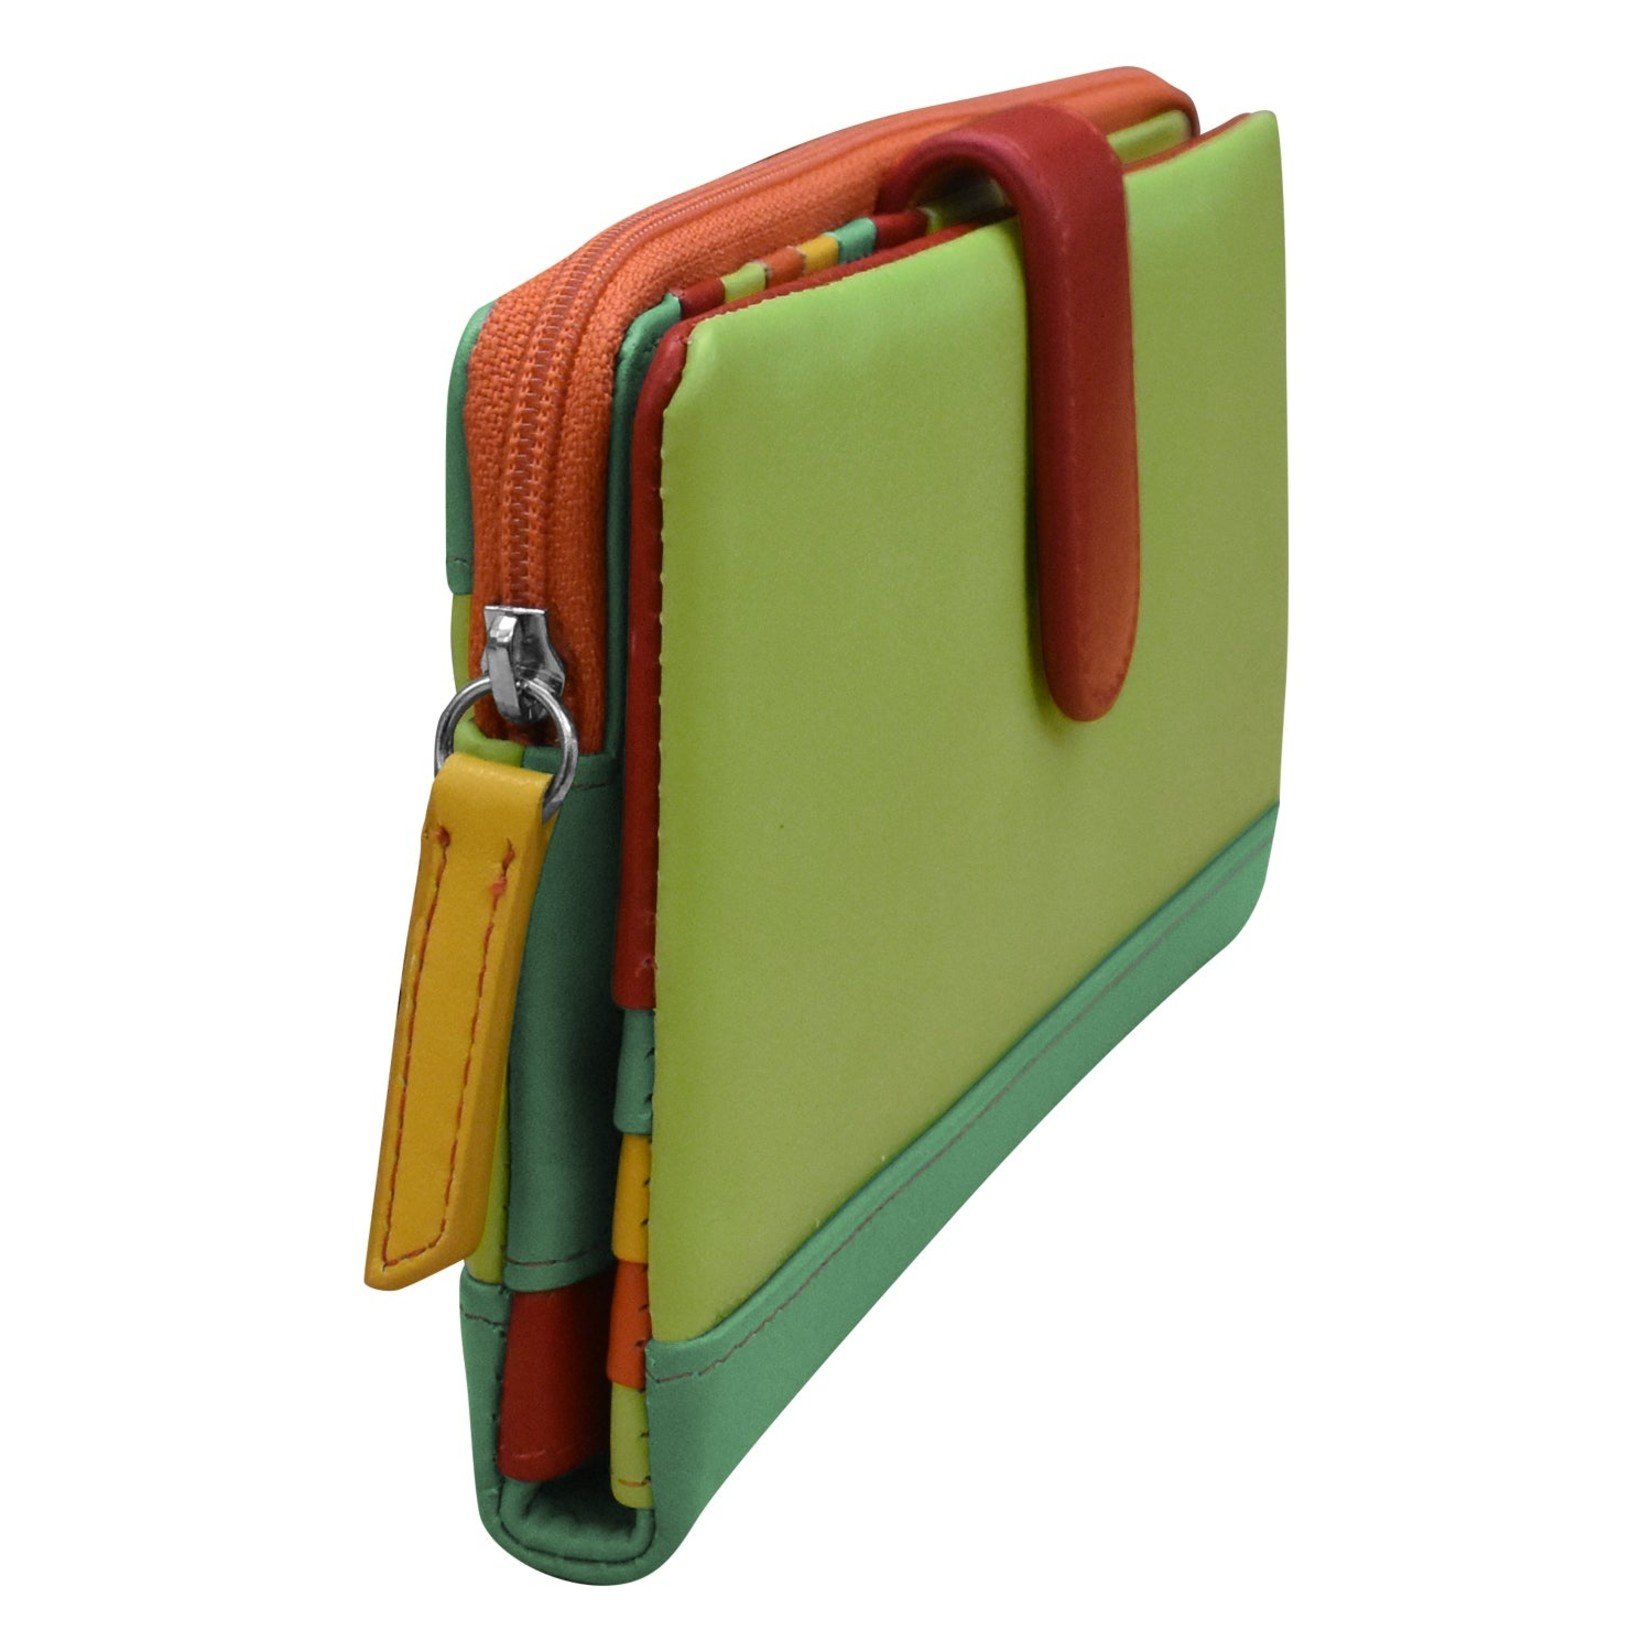 Leather Handbags and Accessories 7420 Citrus - RFID Smartphone Wallet